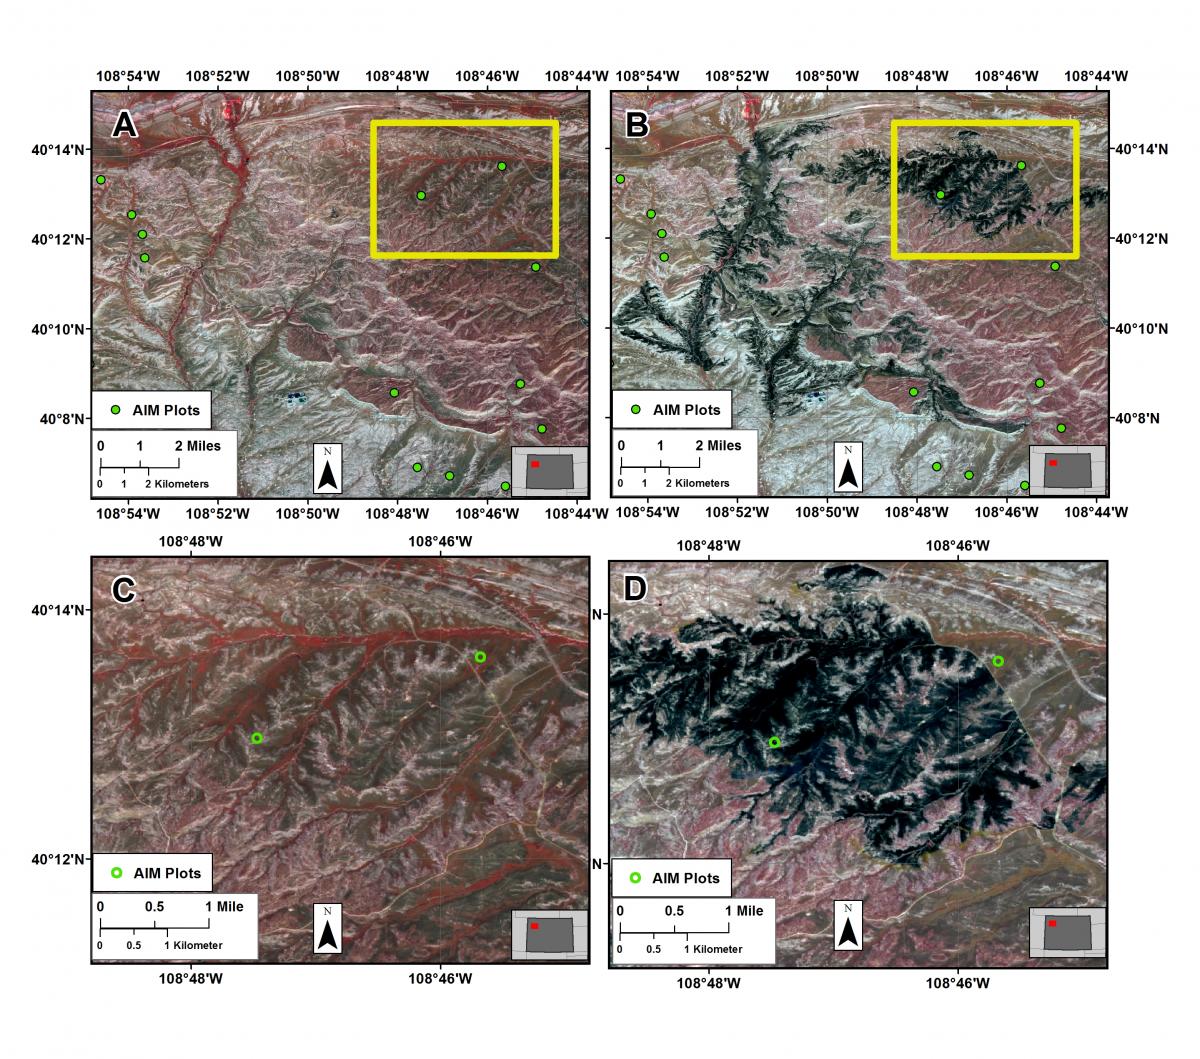 Figures A and B: Sentinel-2 imagery acquired before and after the Dead Dog Fire in northwestern Colorado in May and June 2017, respectively. Assessment, Inventory and Monitoring (AIM) plot locations are in green. Figures C and D: close up of pre- and post-fire Sentinel-2 imagery identifying an AIM plot disturbance.  AIM plots locations are in green. 